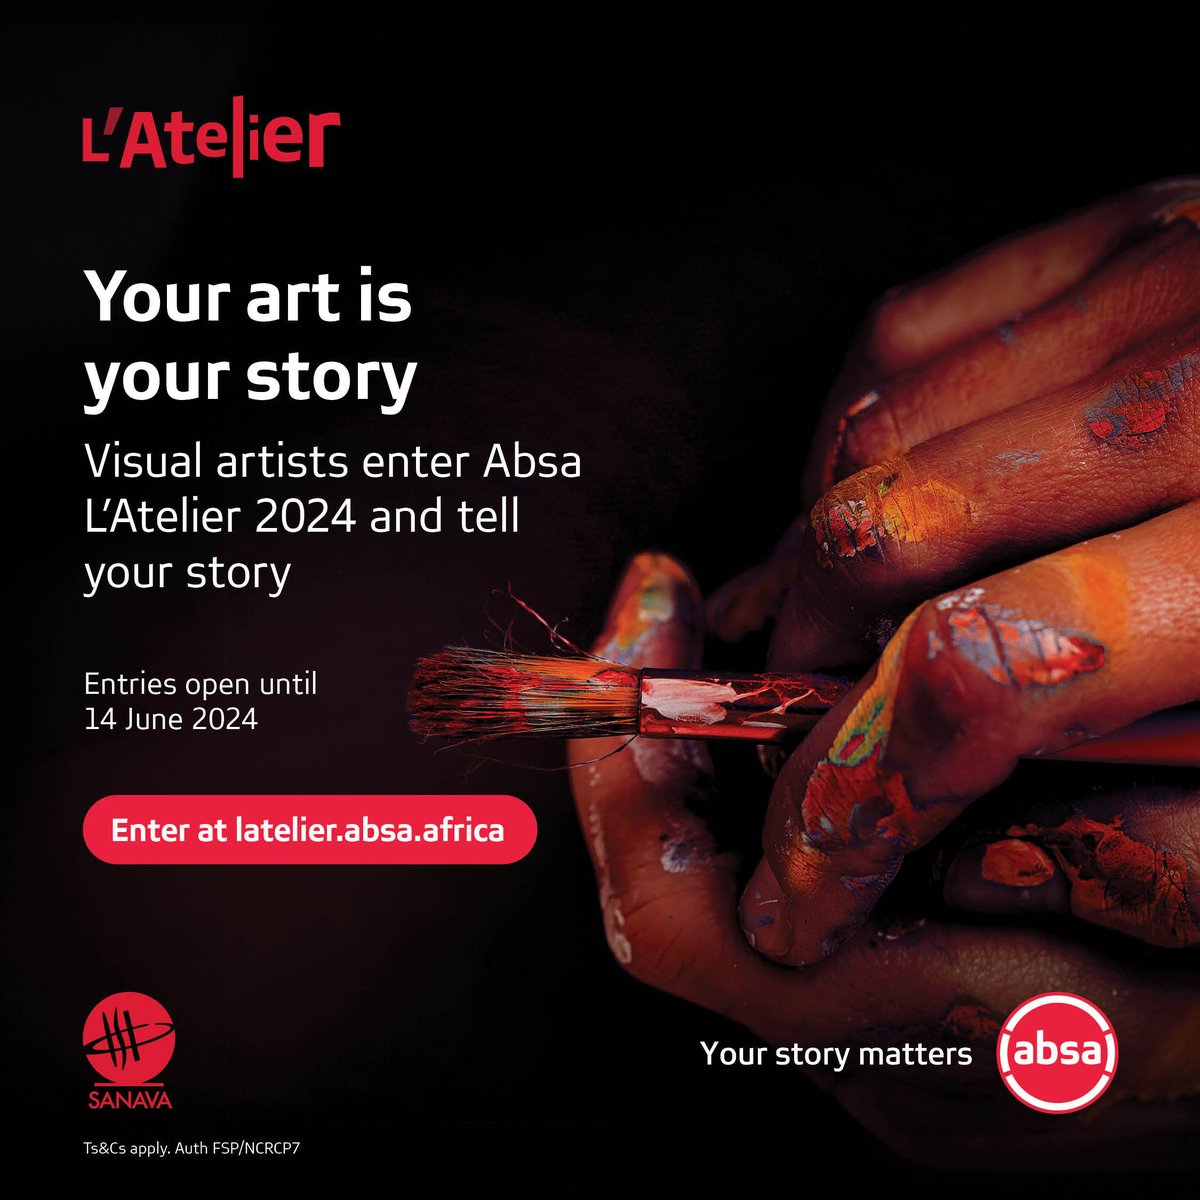 ✨Ready to elevate your artistry?
Absa L’Atelier 2024 is now open for entries!
Whether you're a painter, sculptor, or photographer, this is your chance to shine on a global stage.

Entries open until 14 June 2024

latelier.absa.africa/the-competitio…

#AbsaLatelier #YourStoryMatters